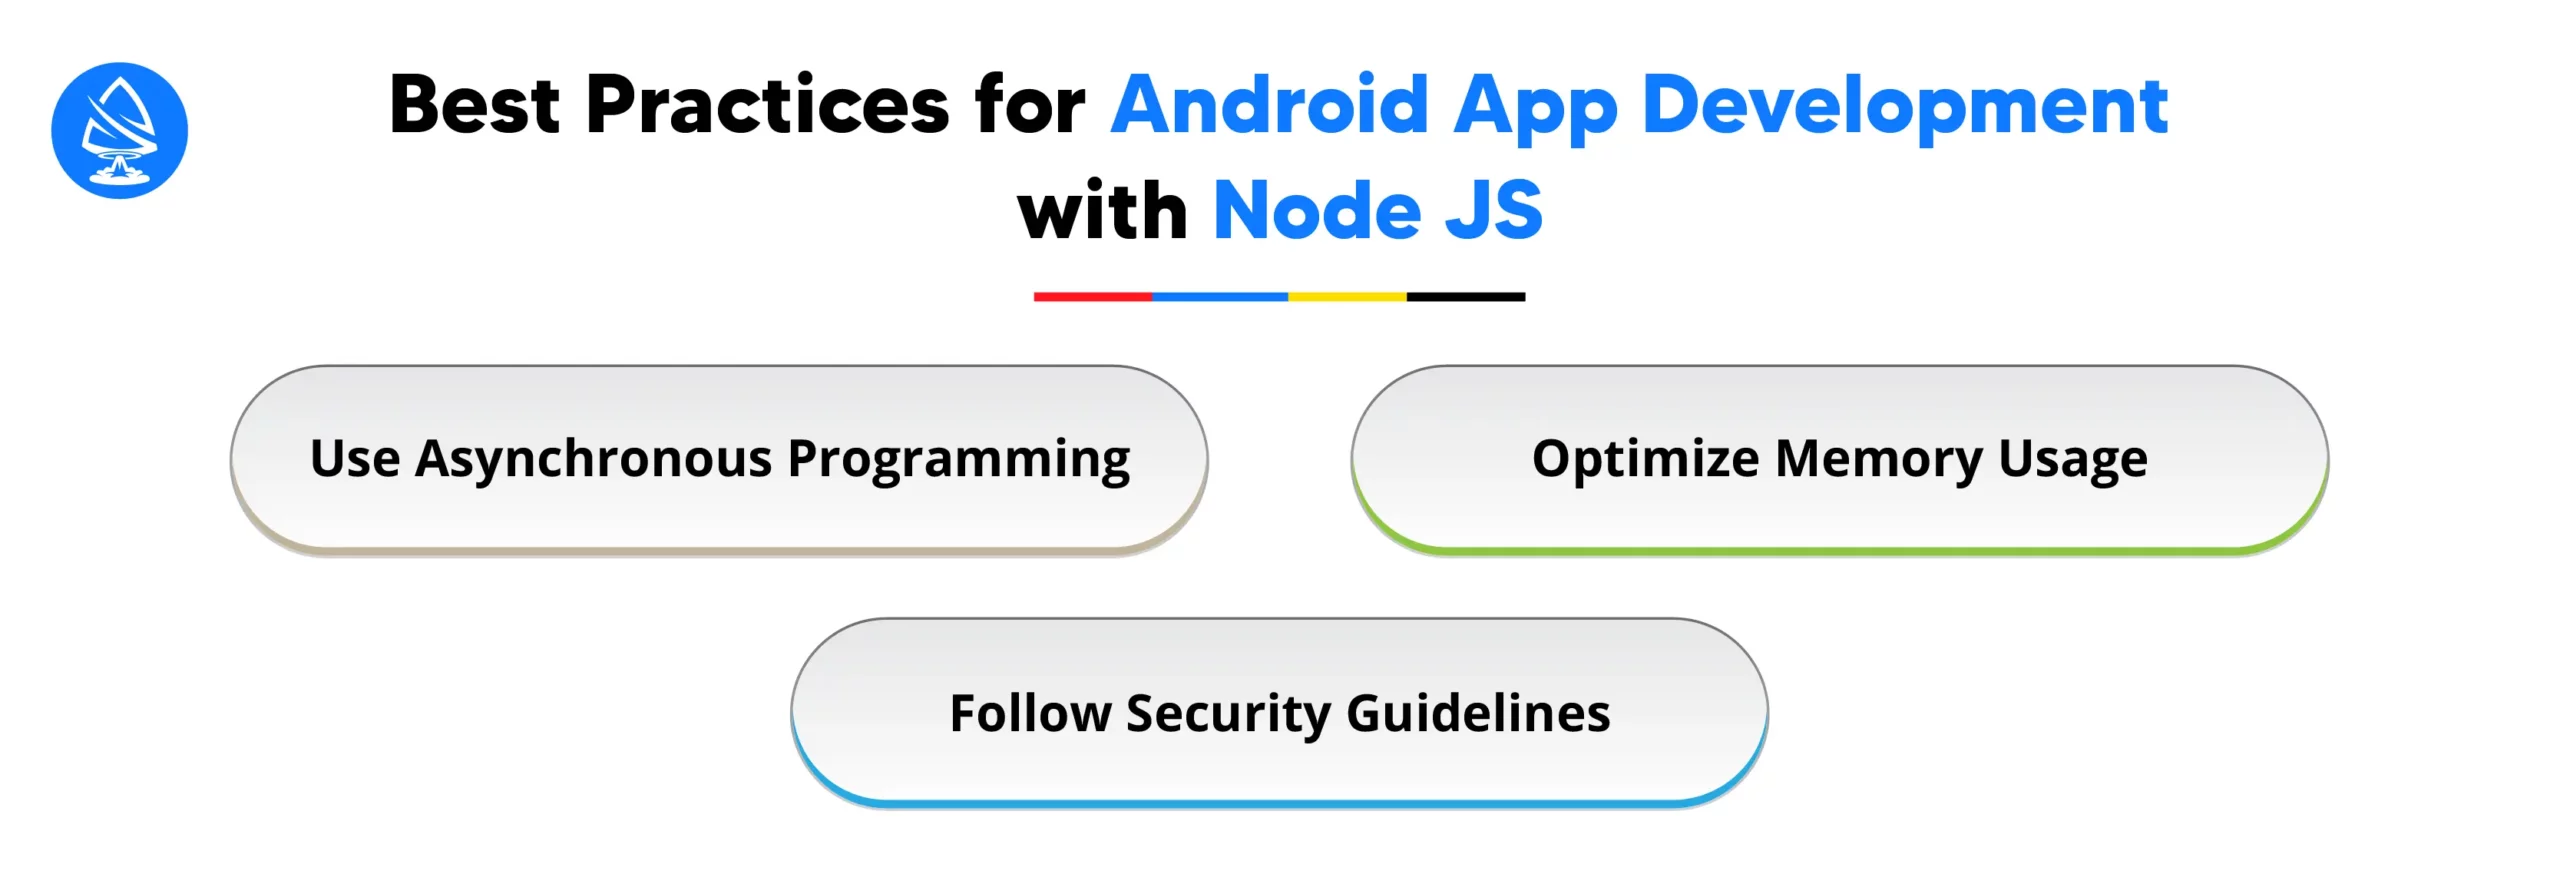 Best Practices for Android App Development with Node JS